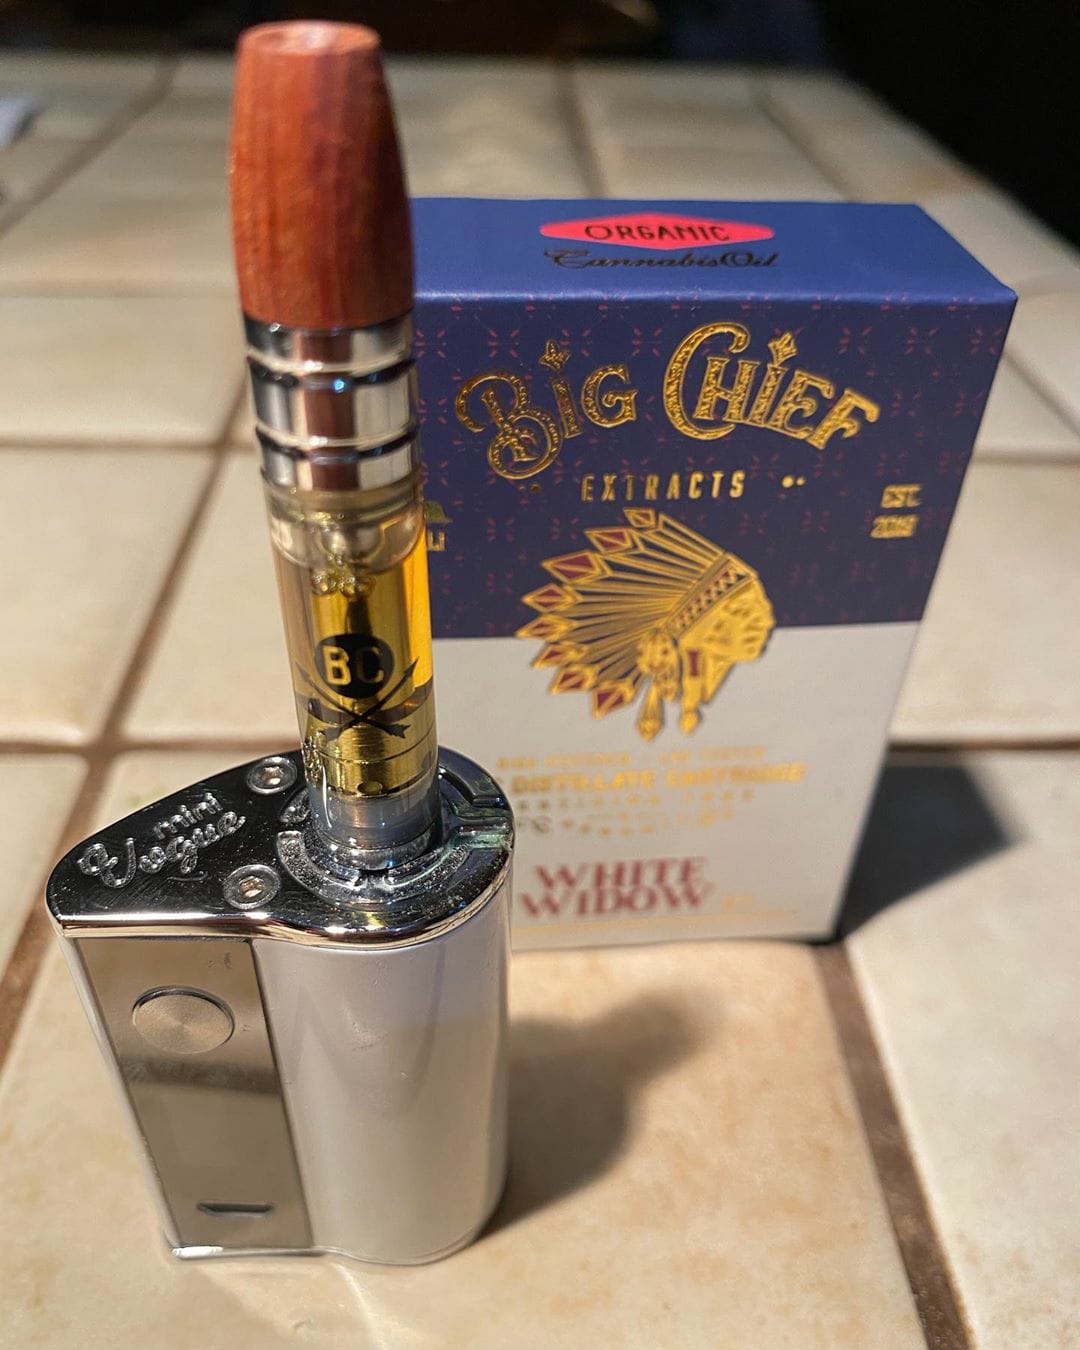 Buy big chief extracts online | Big Chief Carts For Sale Online